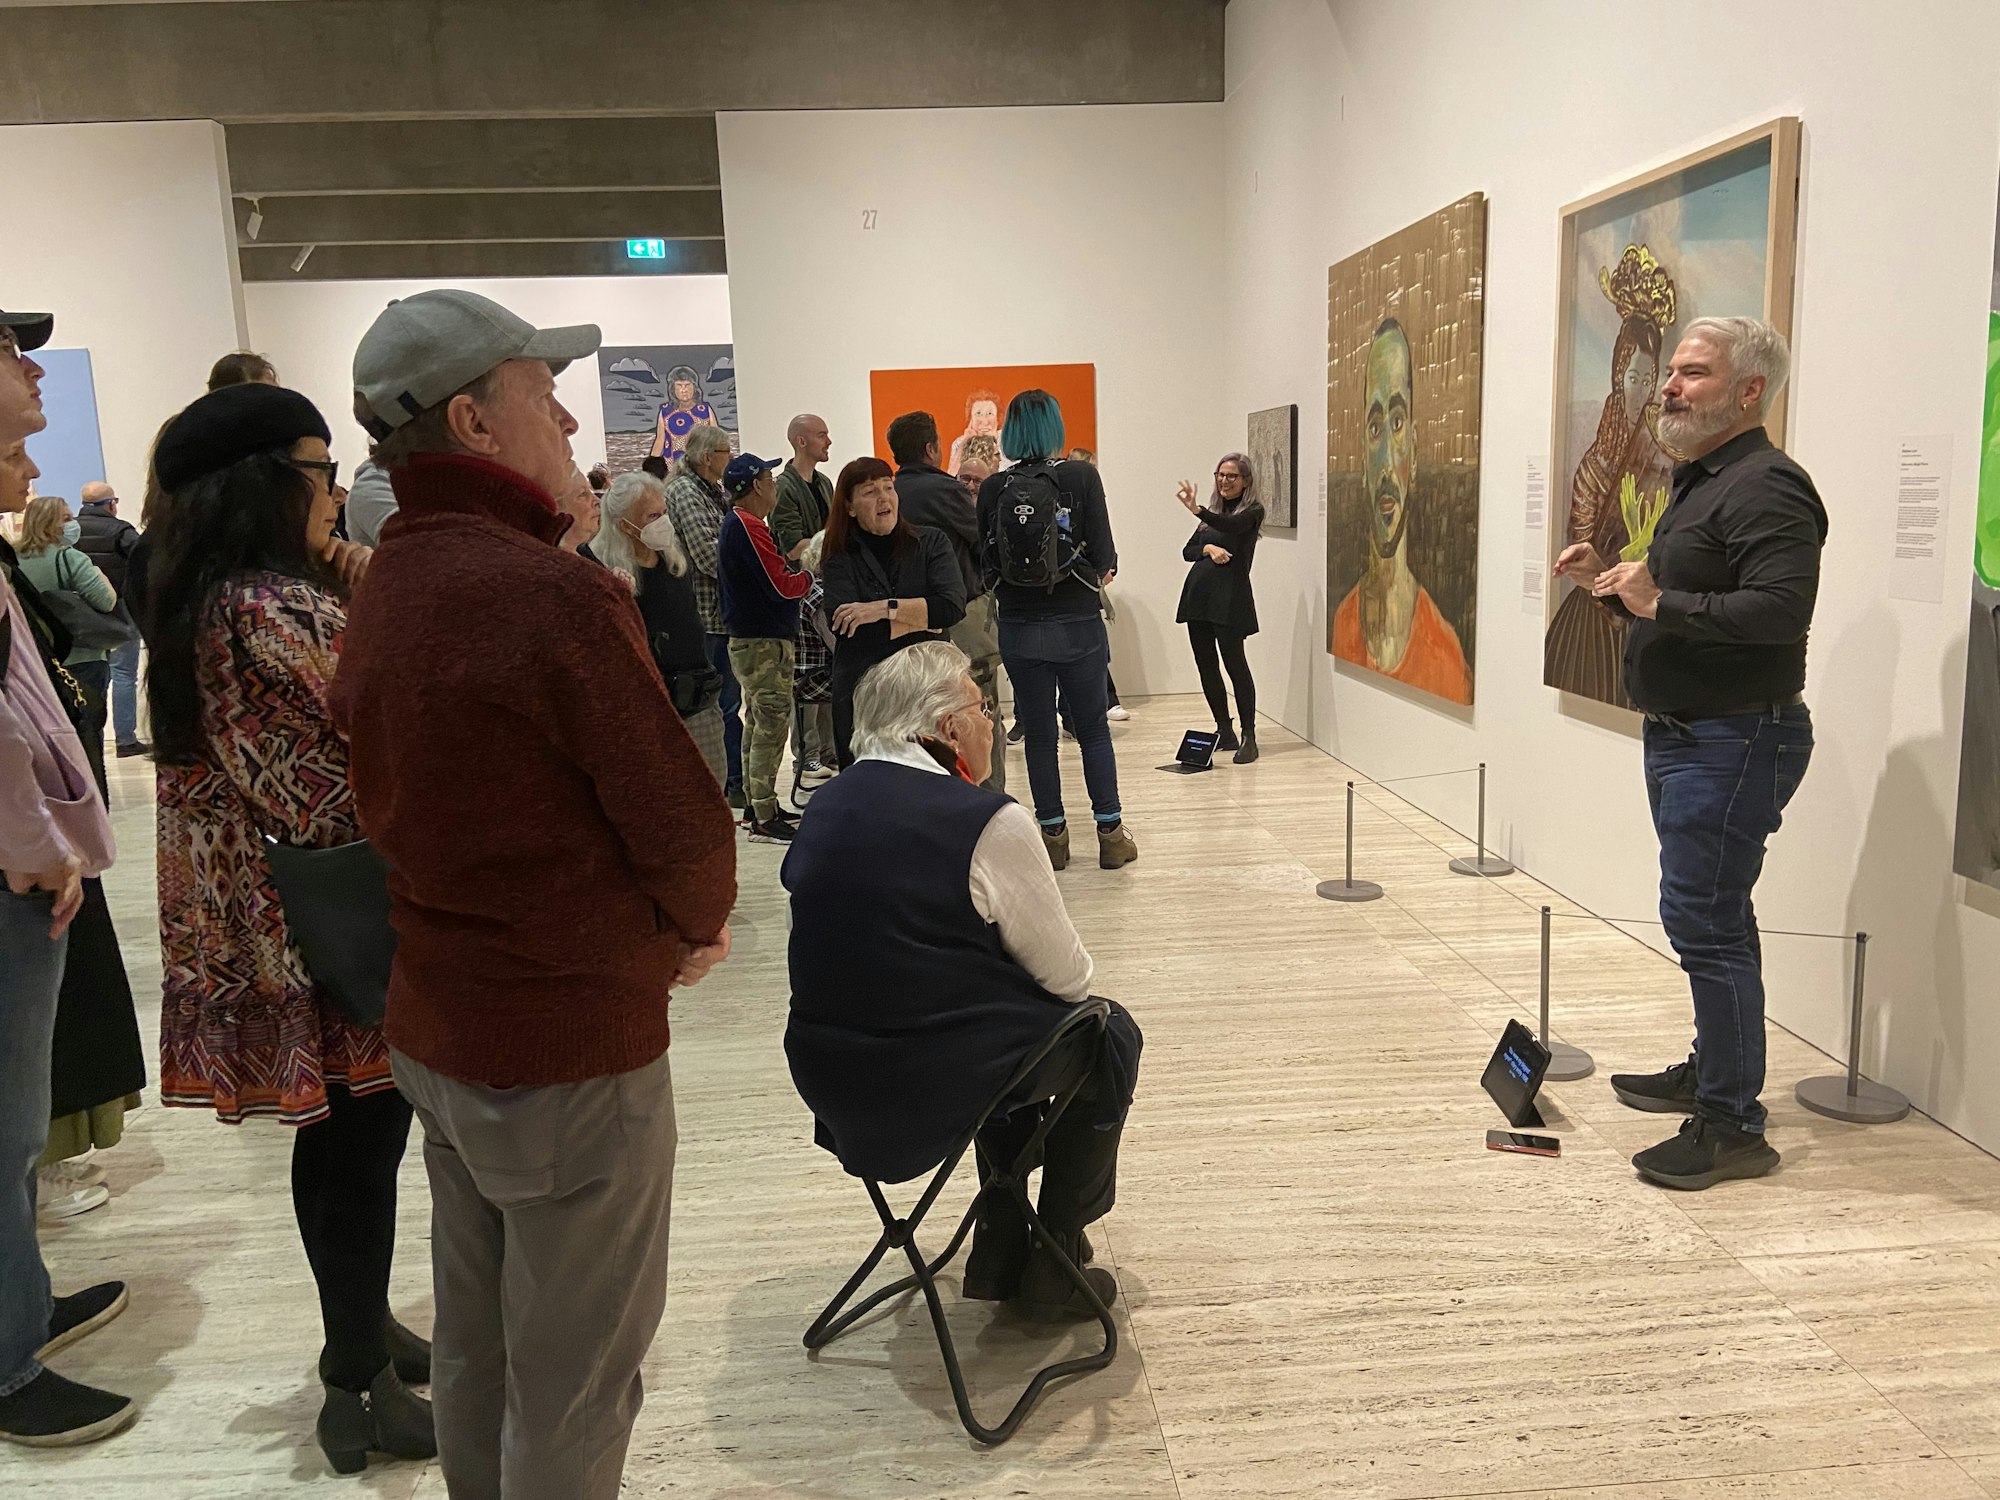 Sue Jo Wright and Todd Wright presenting Auslan tour in the Archibald 2022 exhibition.